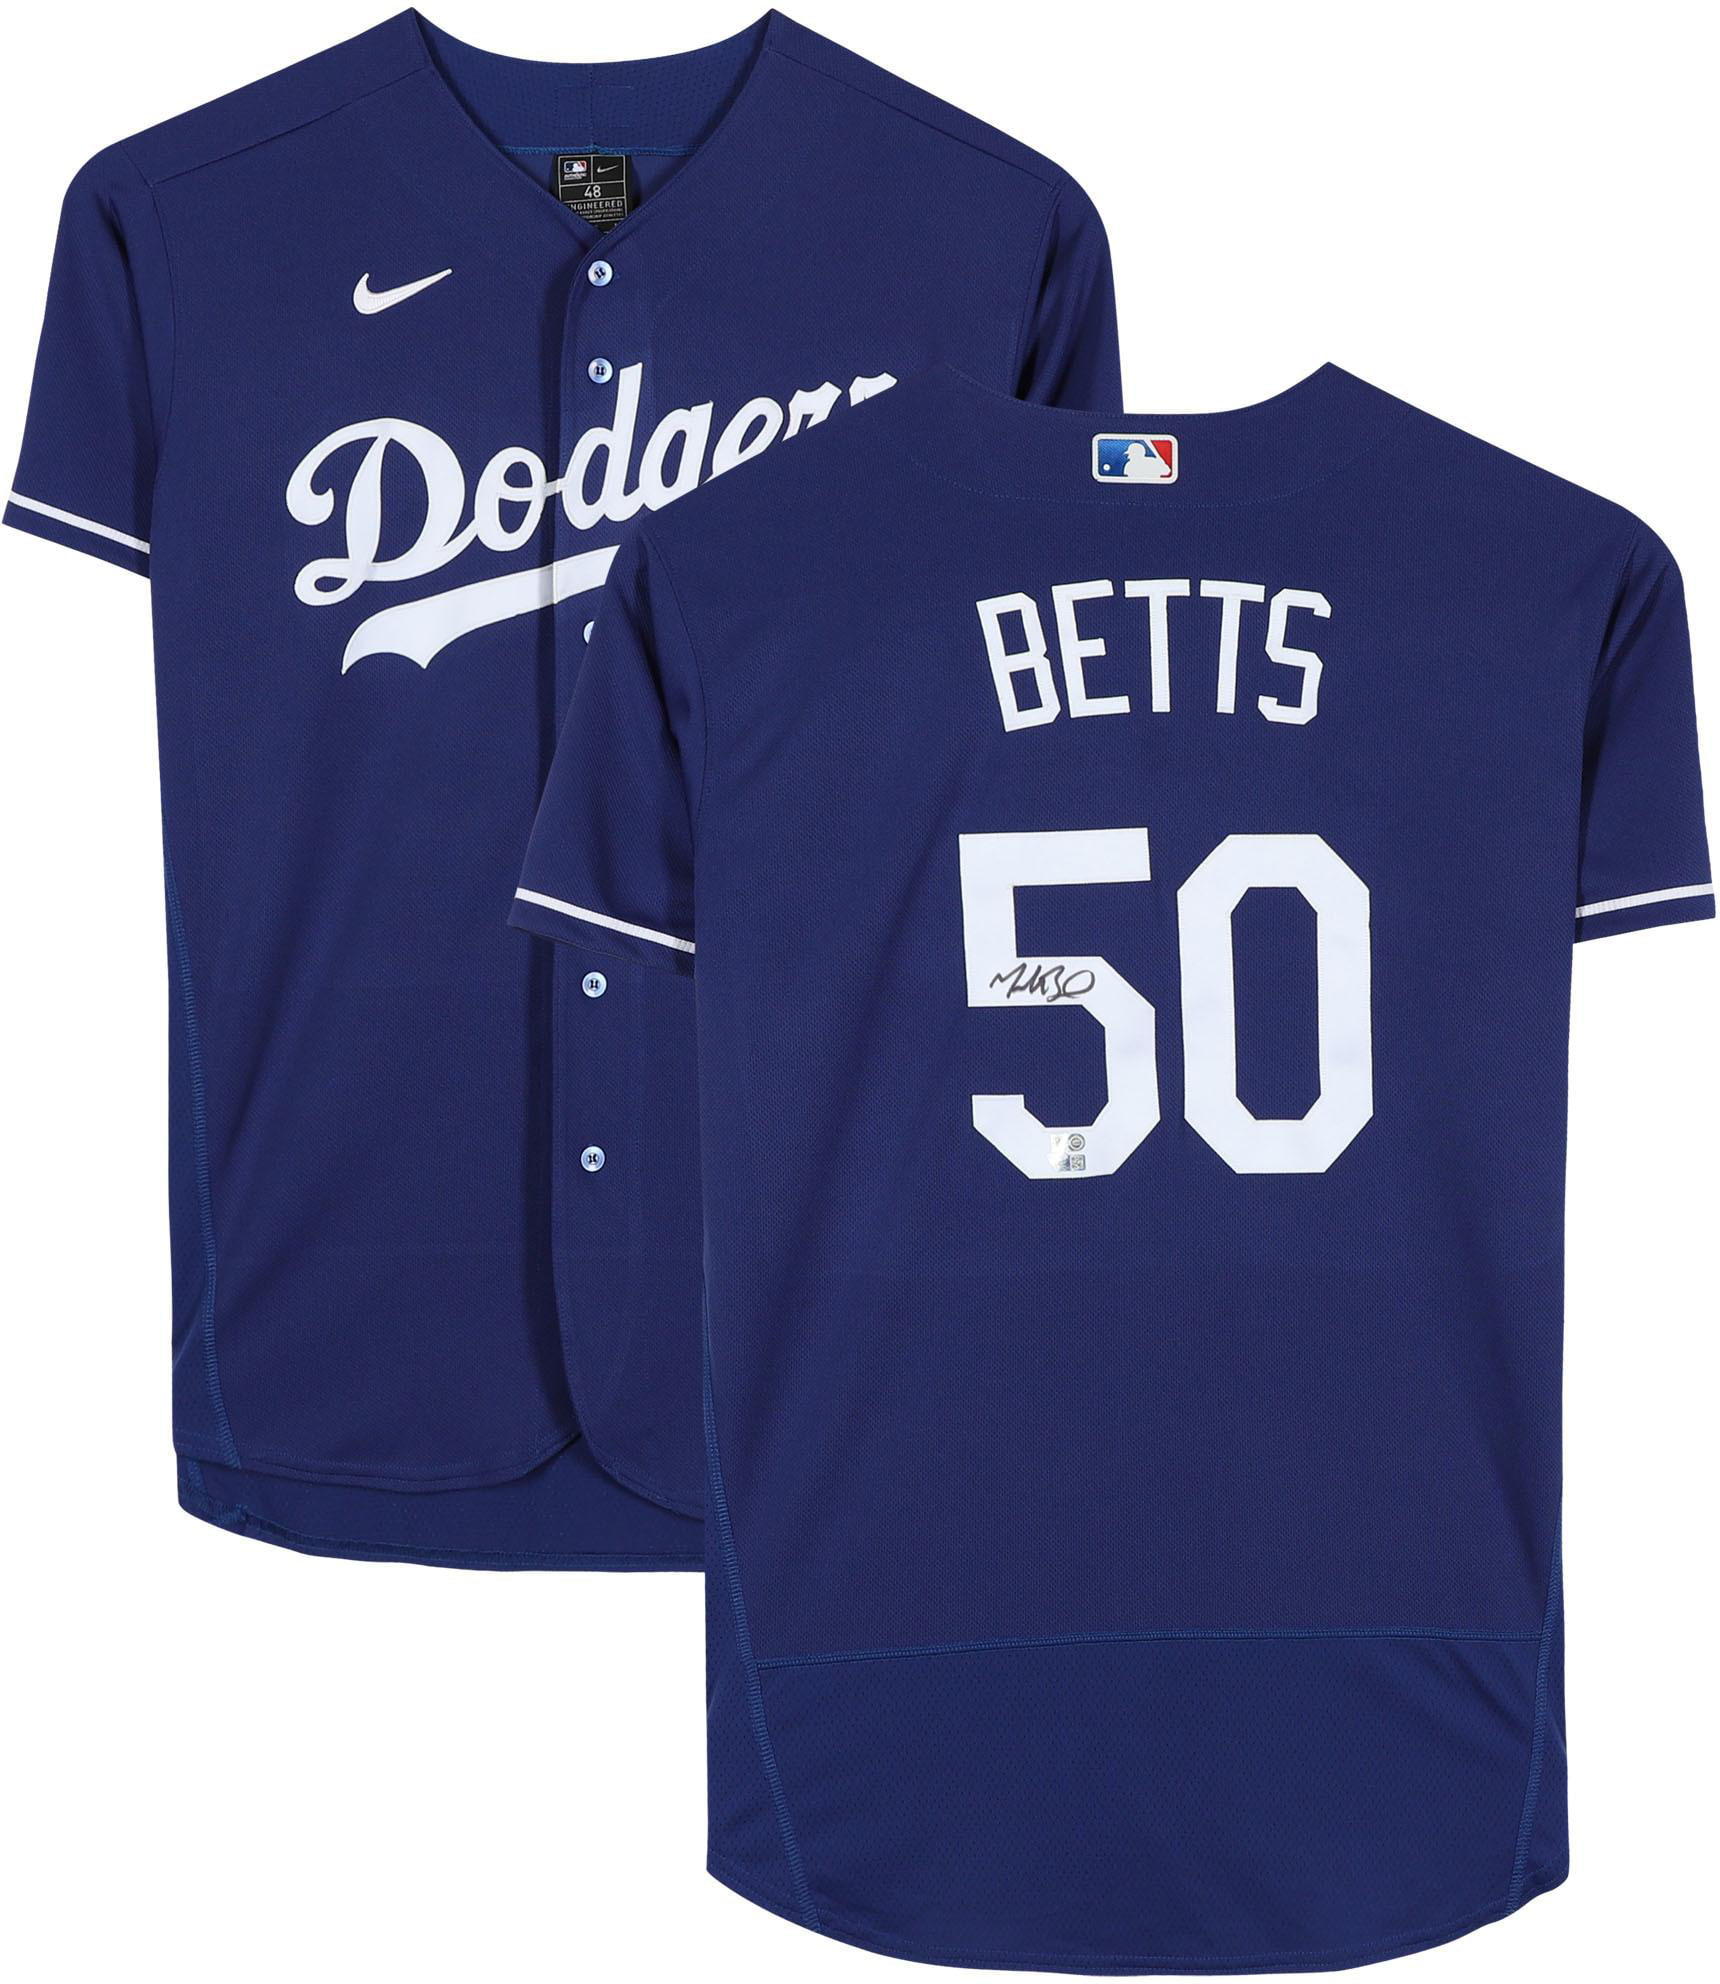 mookie betts authentic jersey dodgers